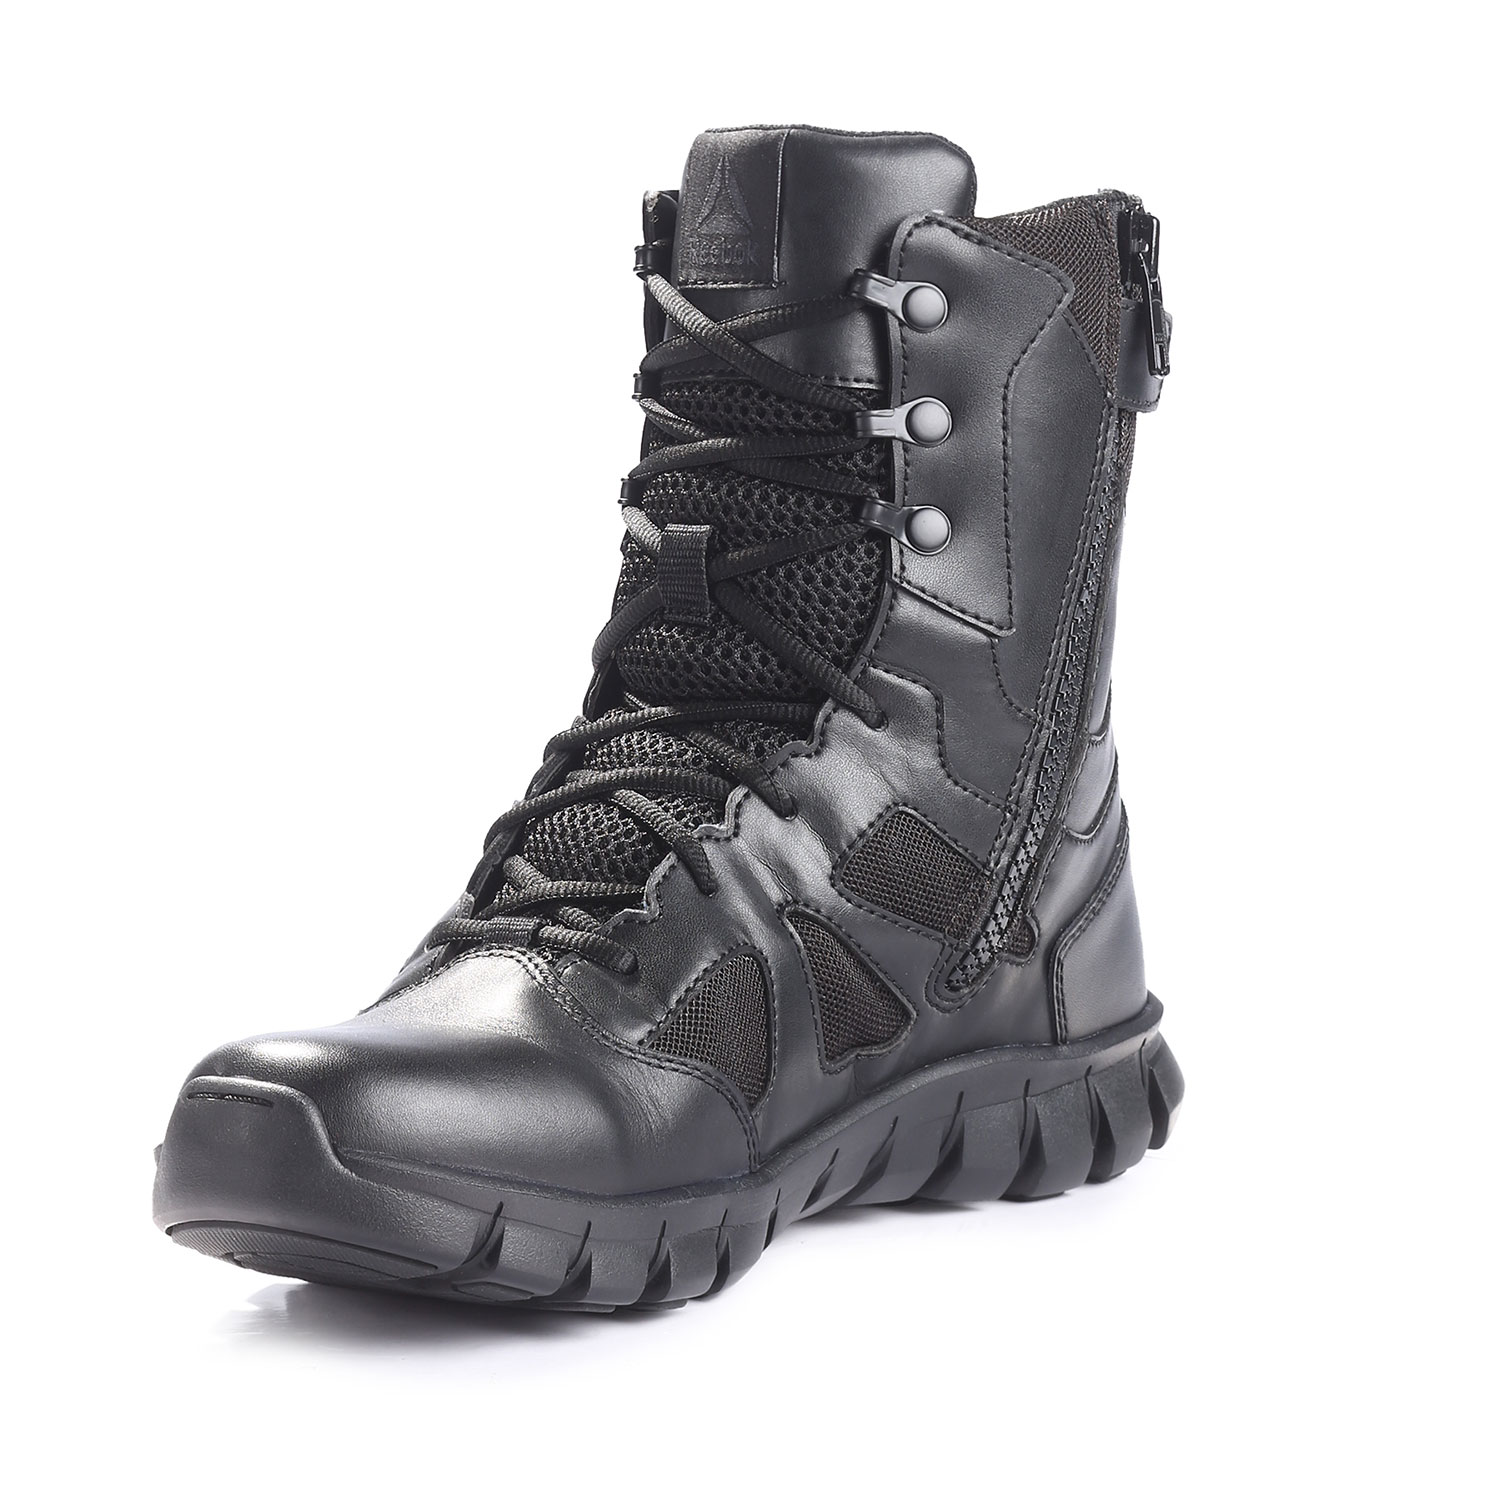 Reebok 8" Sublite Cushion Tactical Side Zip Boot